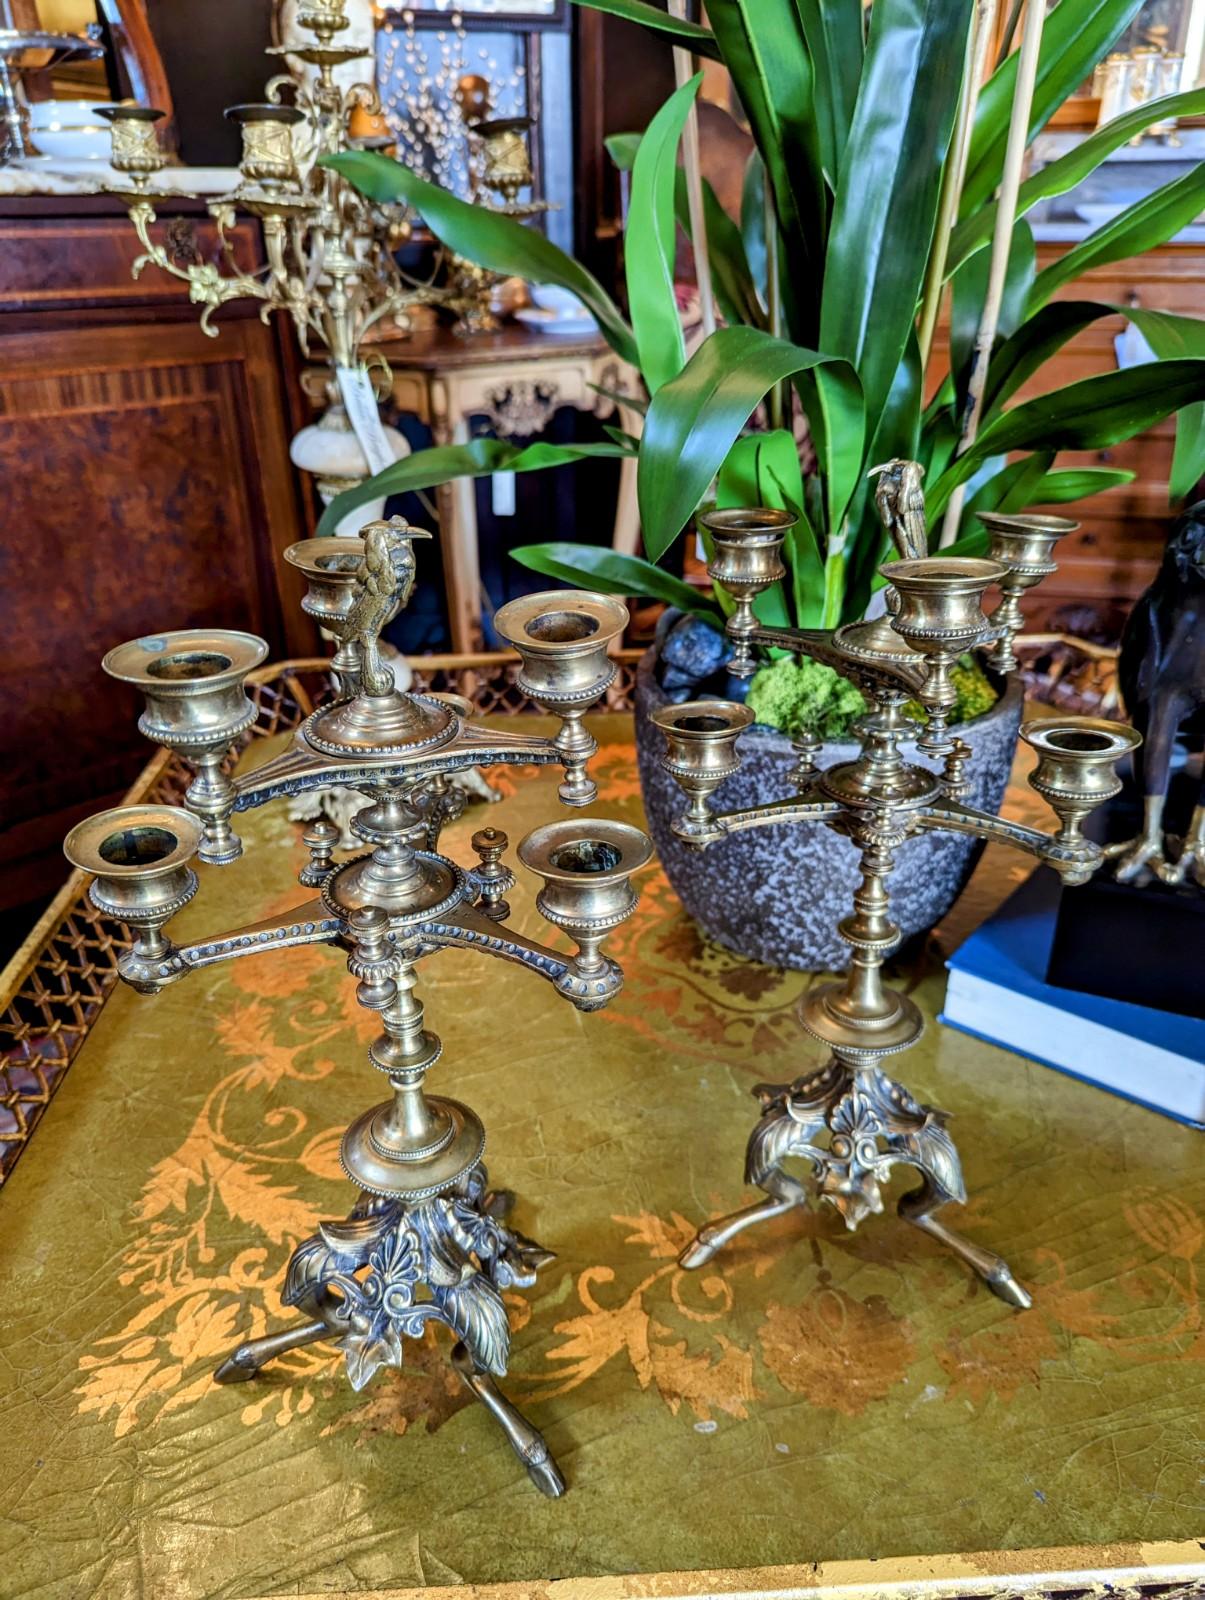 Pair of Antique Candelabras, 19th Century European Brass Candlesticks Footed For Sale 7